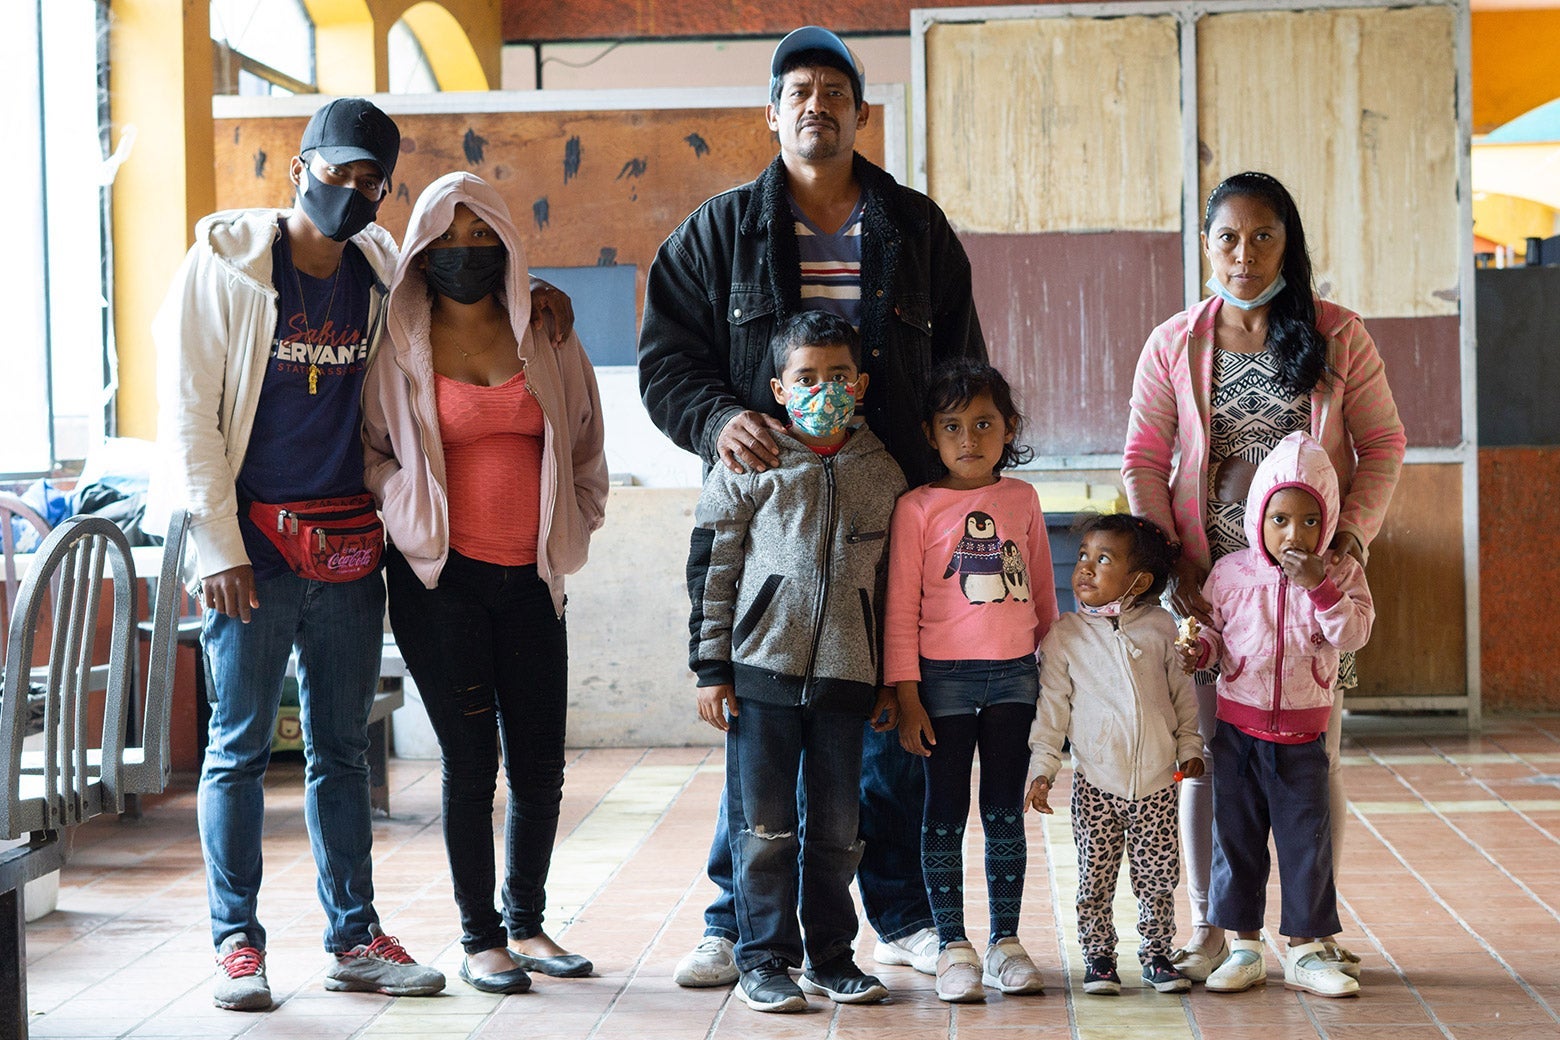 A man and woman stand with four smaller children and two older children off to the side.